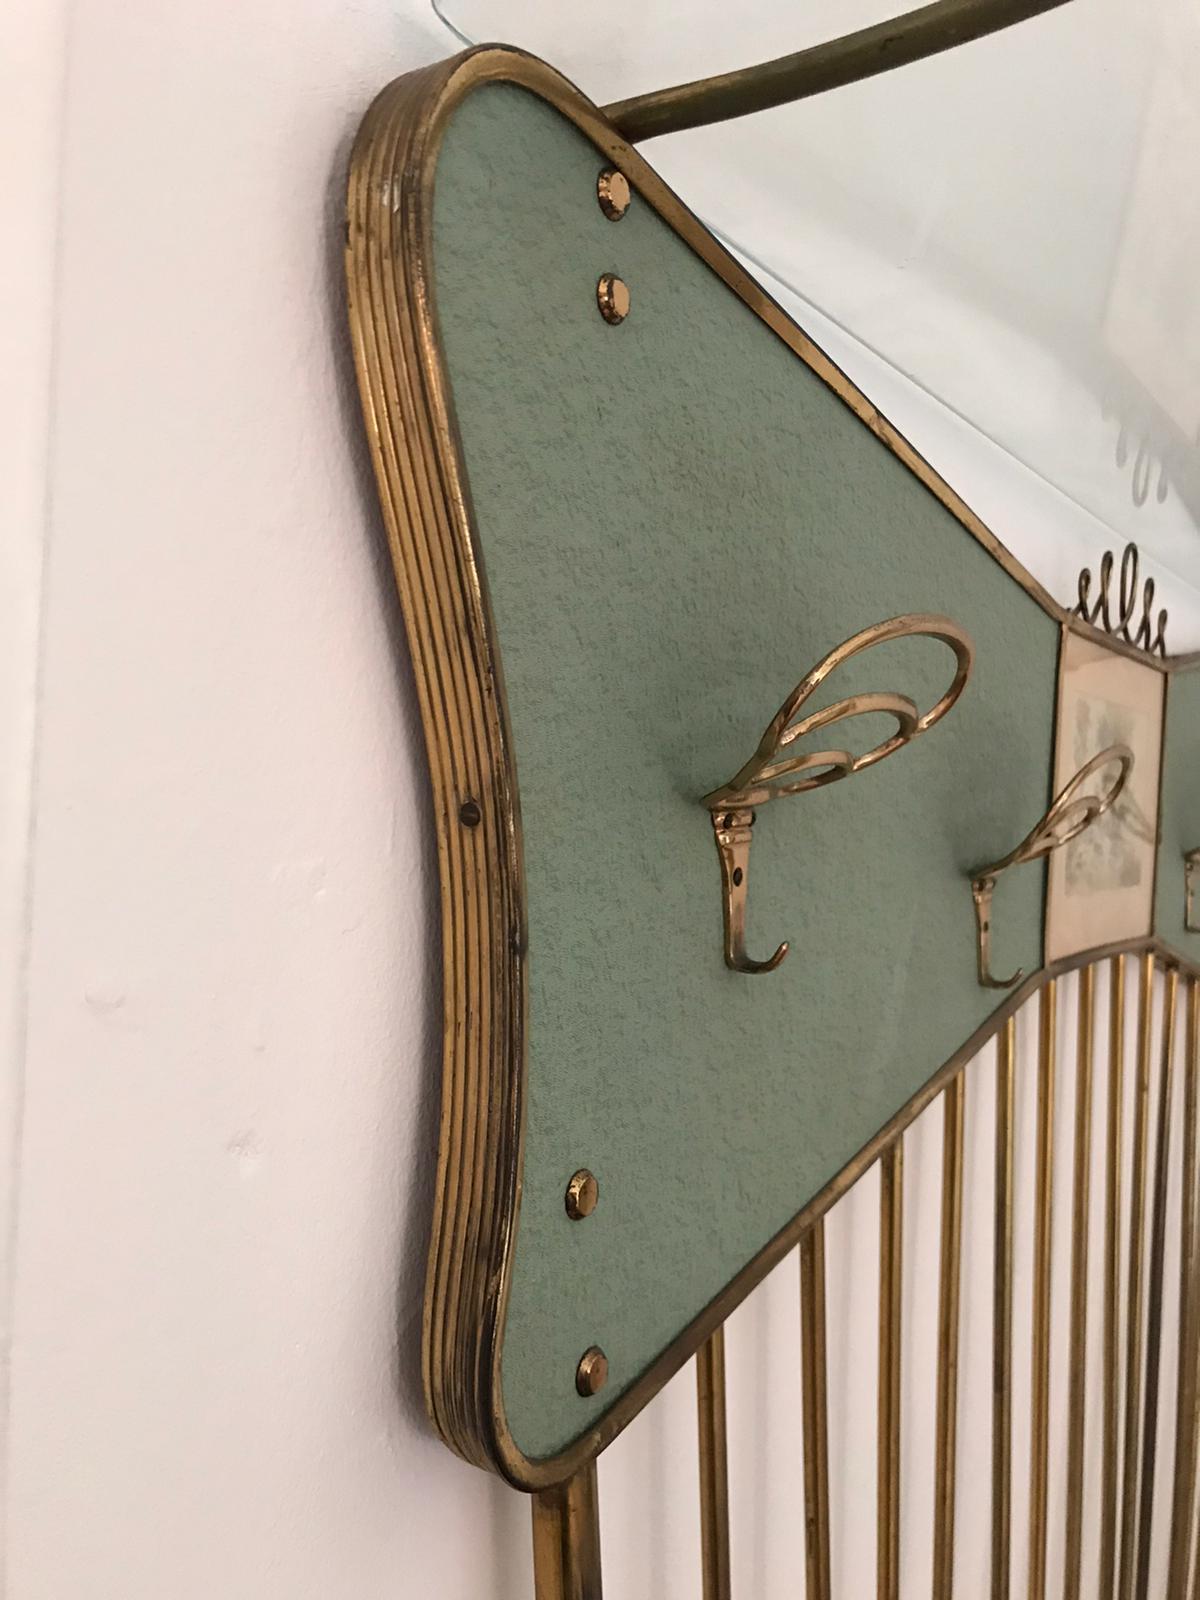 A beautiful midcentury Italian coat rack in brass with a glass top shelf and a signed and dated watercolor.